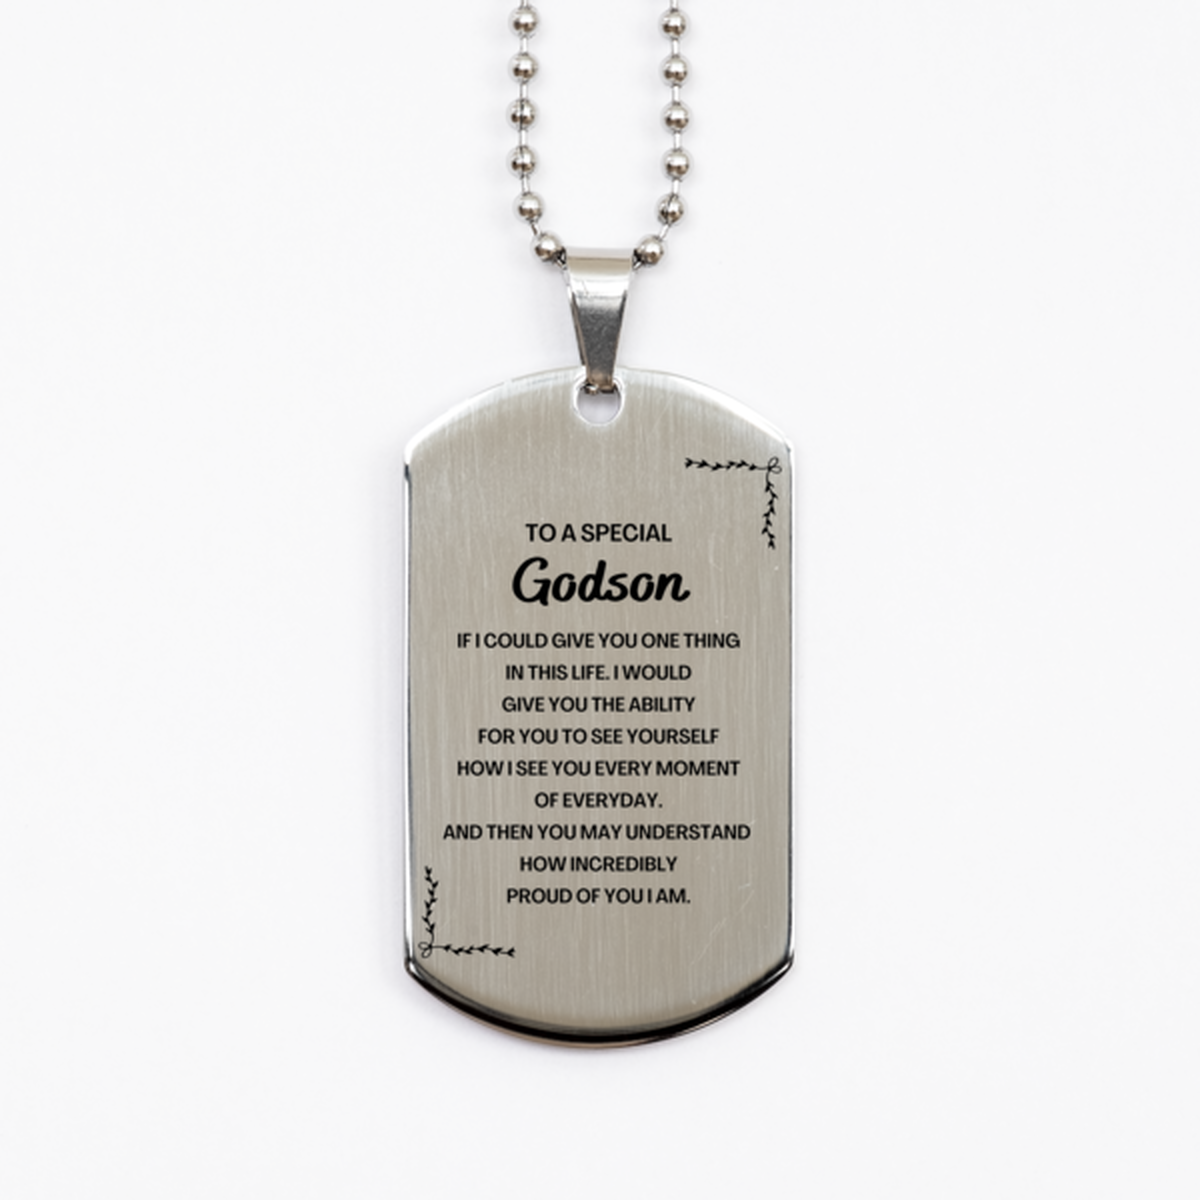 To My Godson Silver Dog Tag, Gifts For Godson Engraved, Inspirational Gifts for Christmas Birthday, Epic Gifts for Godson To A Special Godson how incredibly proud of you I am